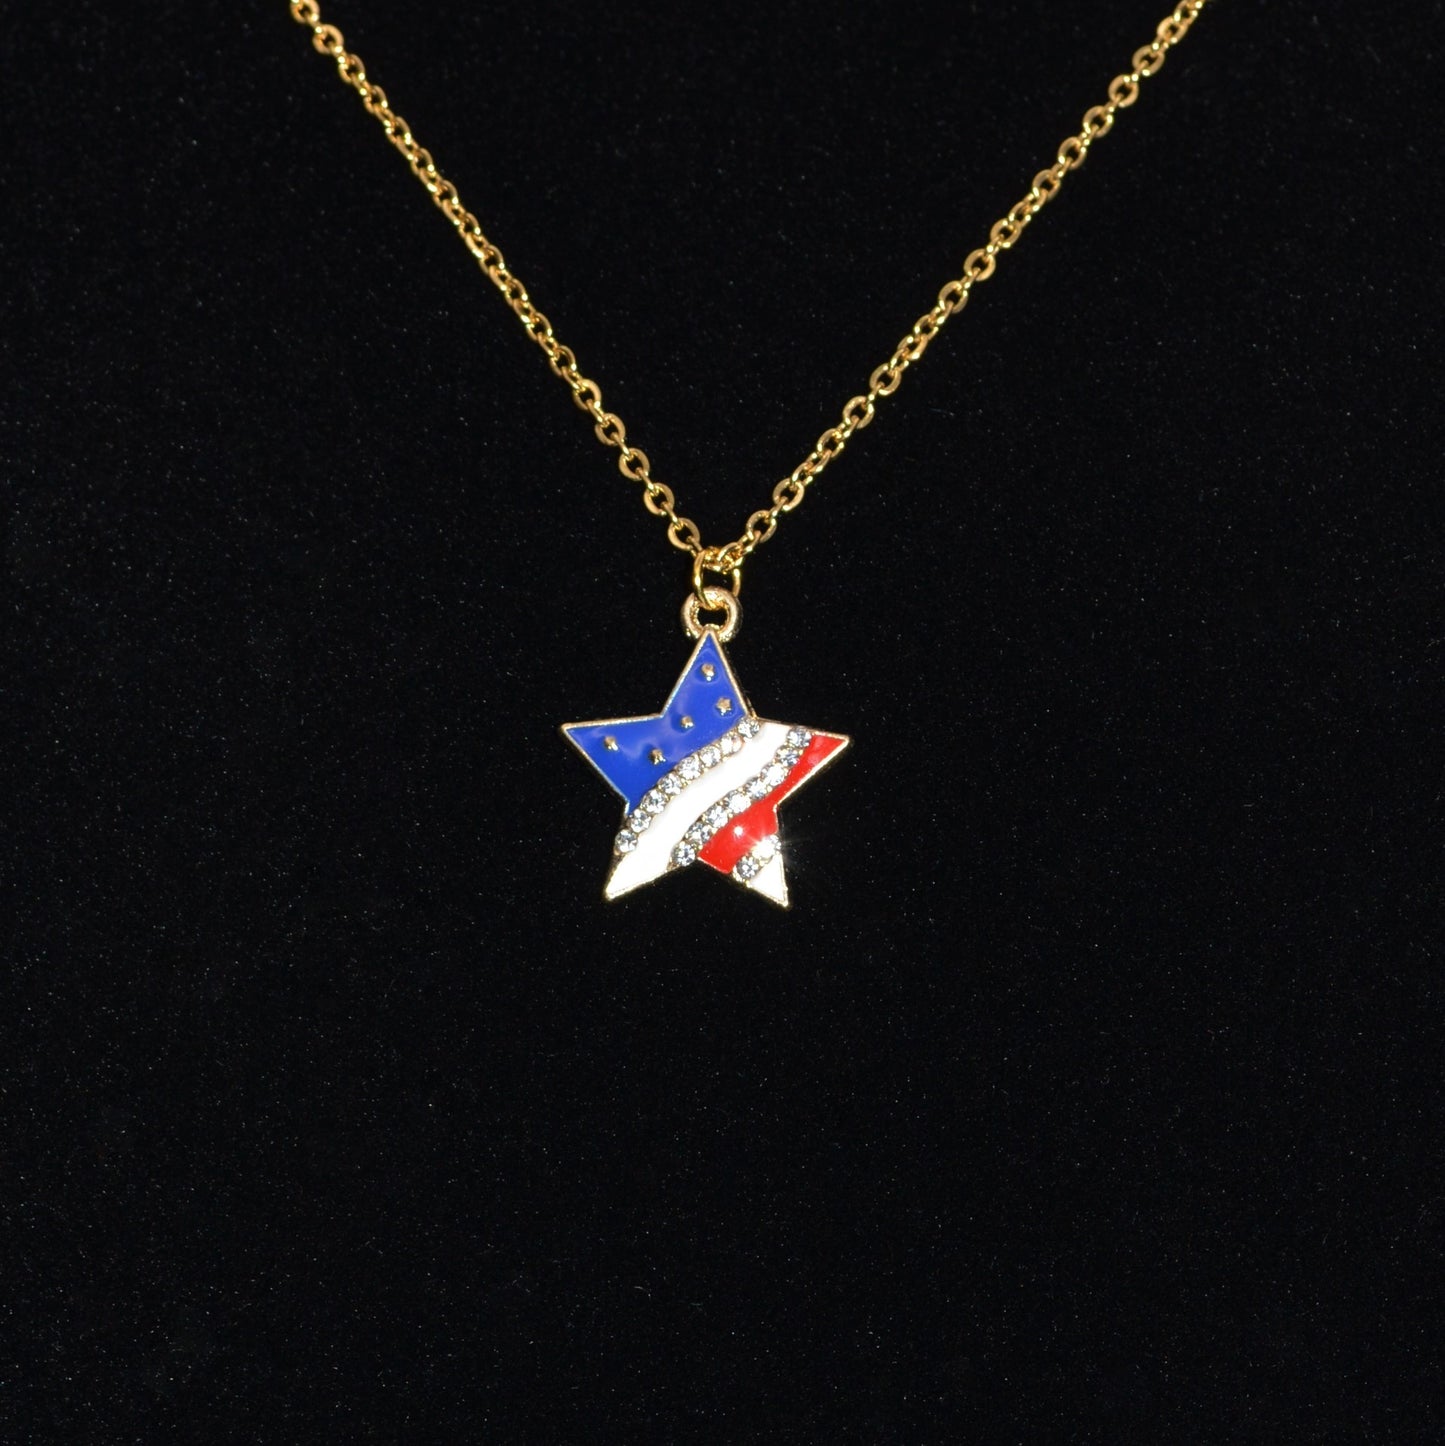 Enamel Star Flag Earrings and Necklace Set